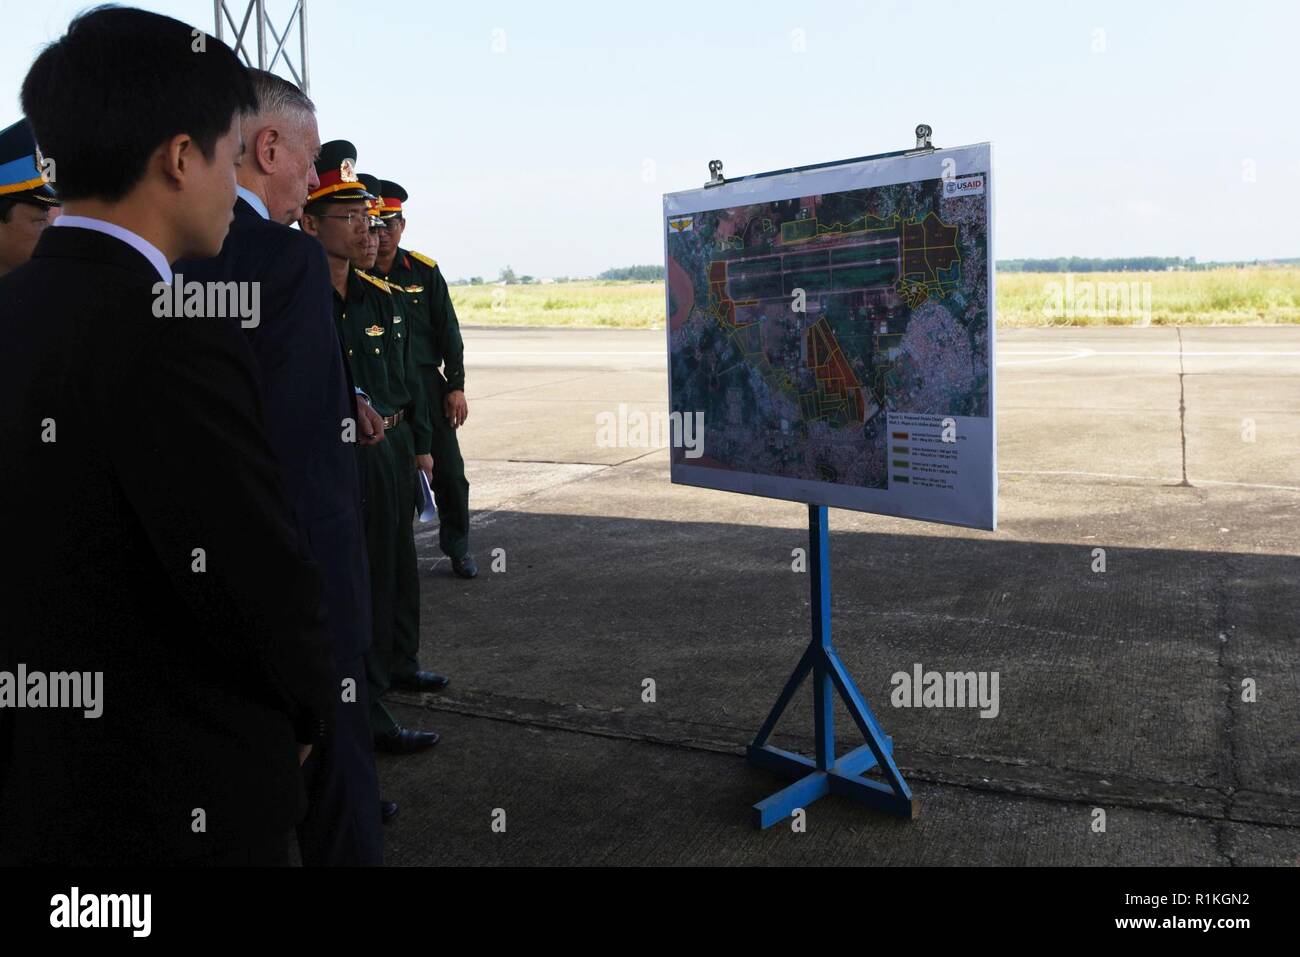 U.S. Secretary of Defense James N. Mattis meets with Vietnamese officials adjacent to a dioxin-contaminated site at Bien Hoa Air Base outside Ho Chi Minh City, Vietnam, Oct. 17, 2018. Stock Photo